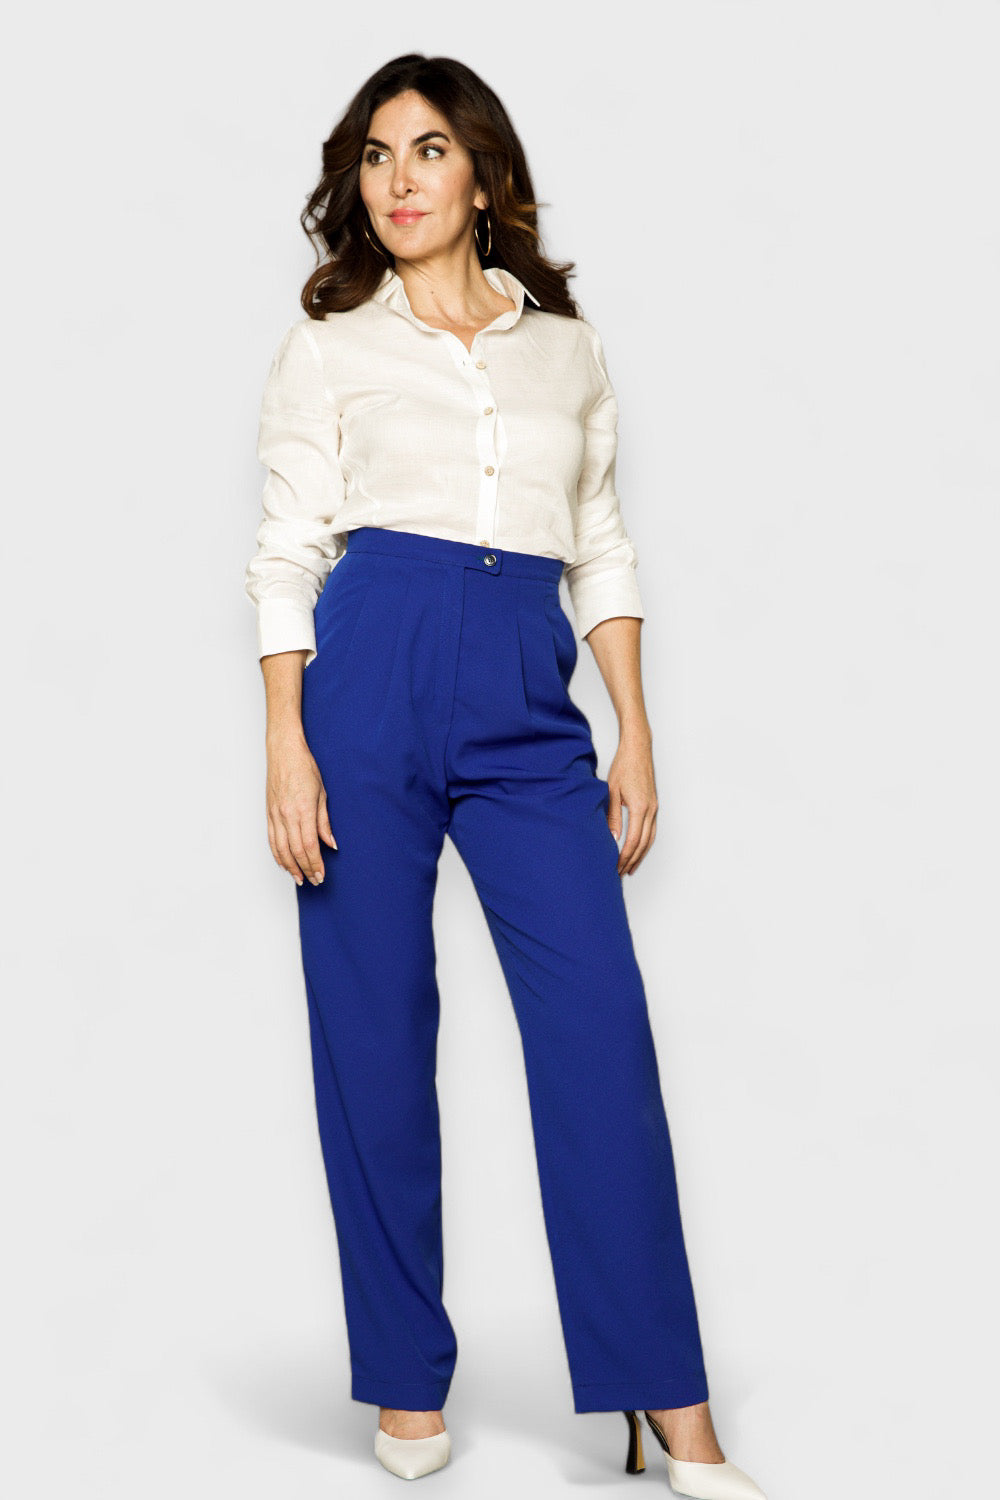 Evelyn Royal Blue Pleated Palazzo Pants  by Sara Sabella Italian Women's Clothing Paired with Bella Off White Shirt